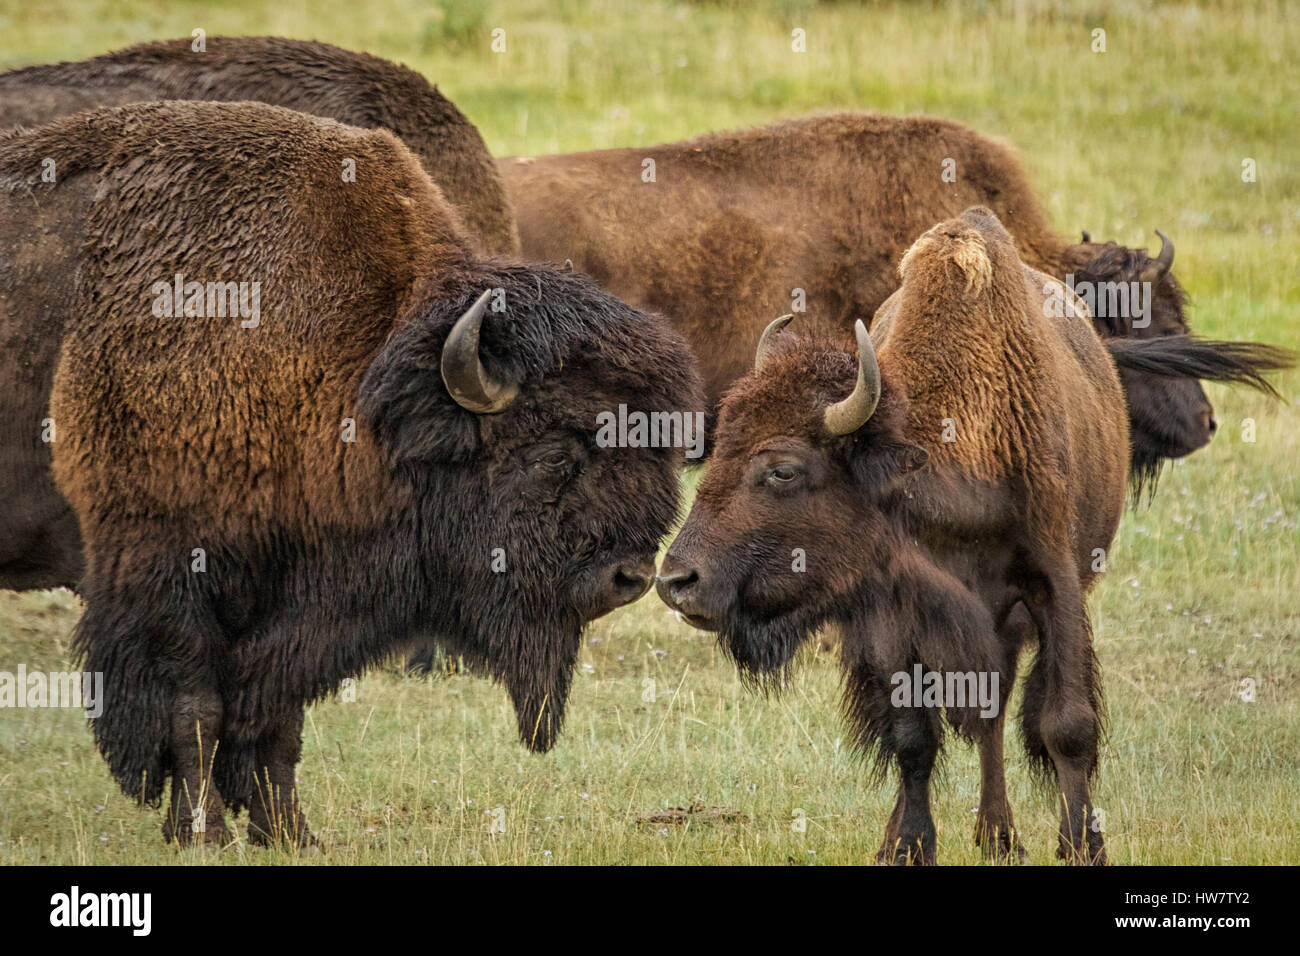 Bison couple nudging noses during the rut in Yellowstone National Park, Wyoming. Stock Photo